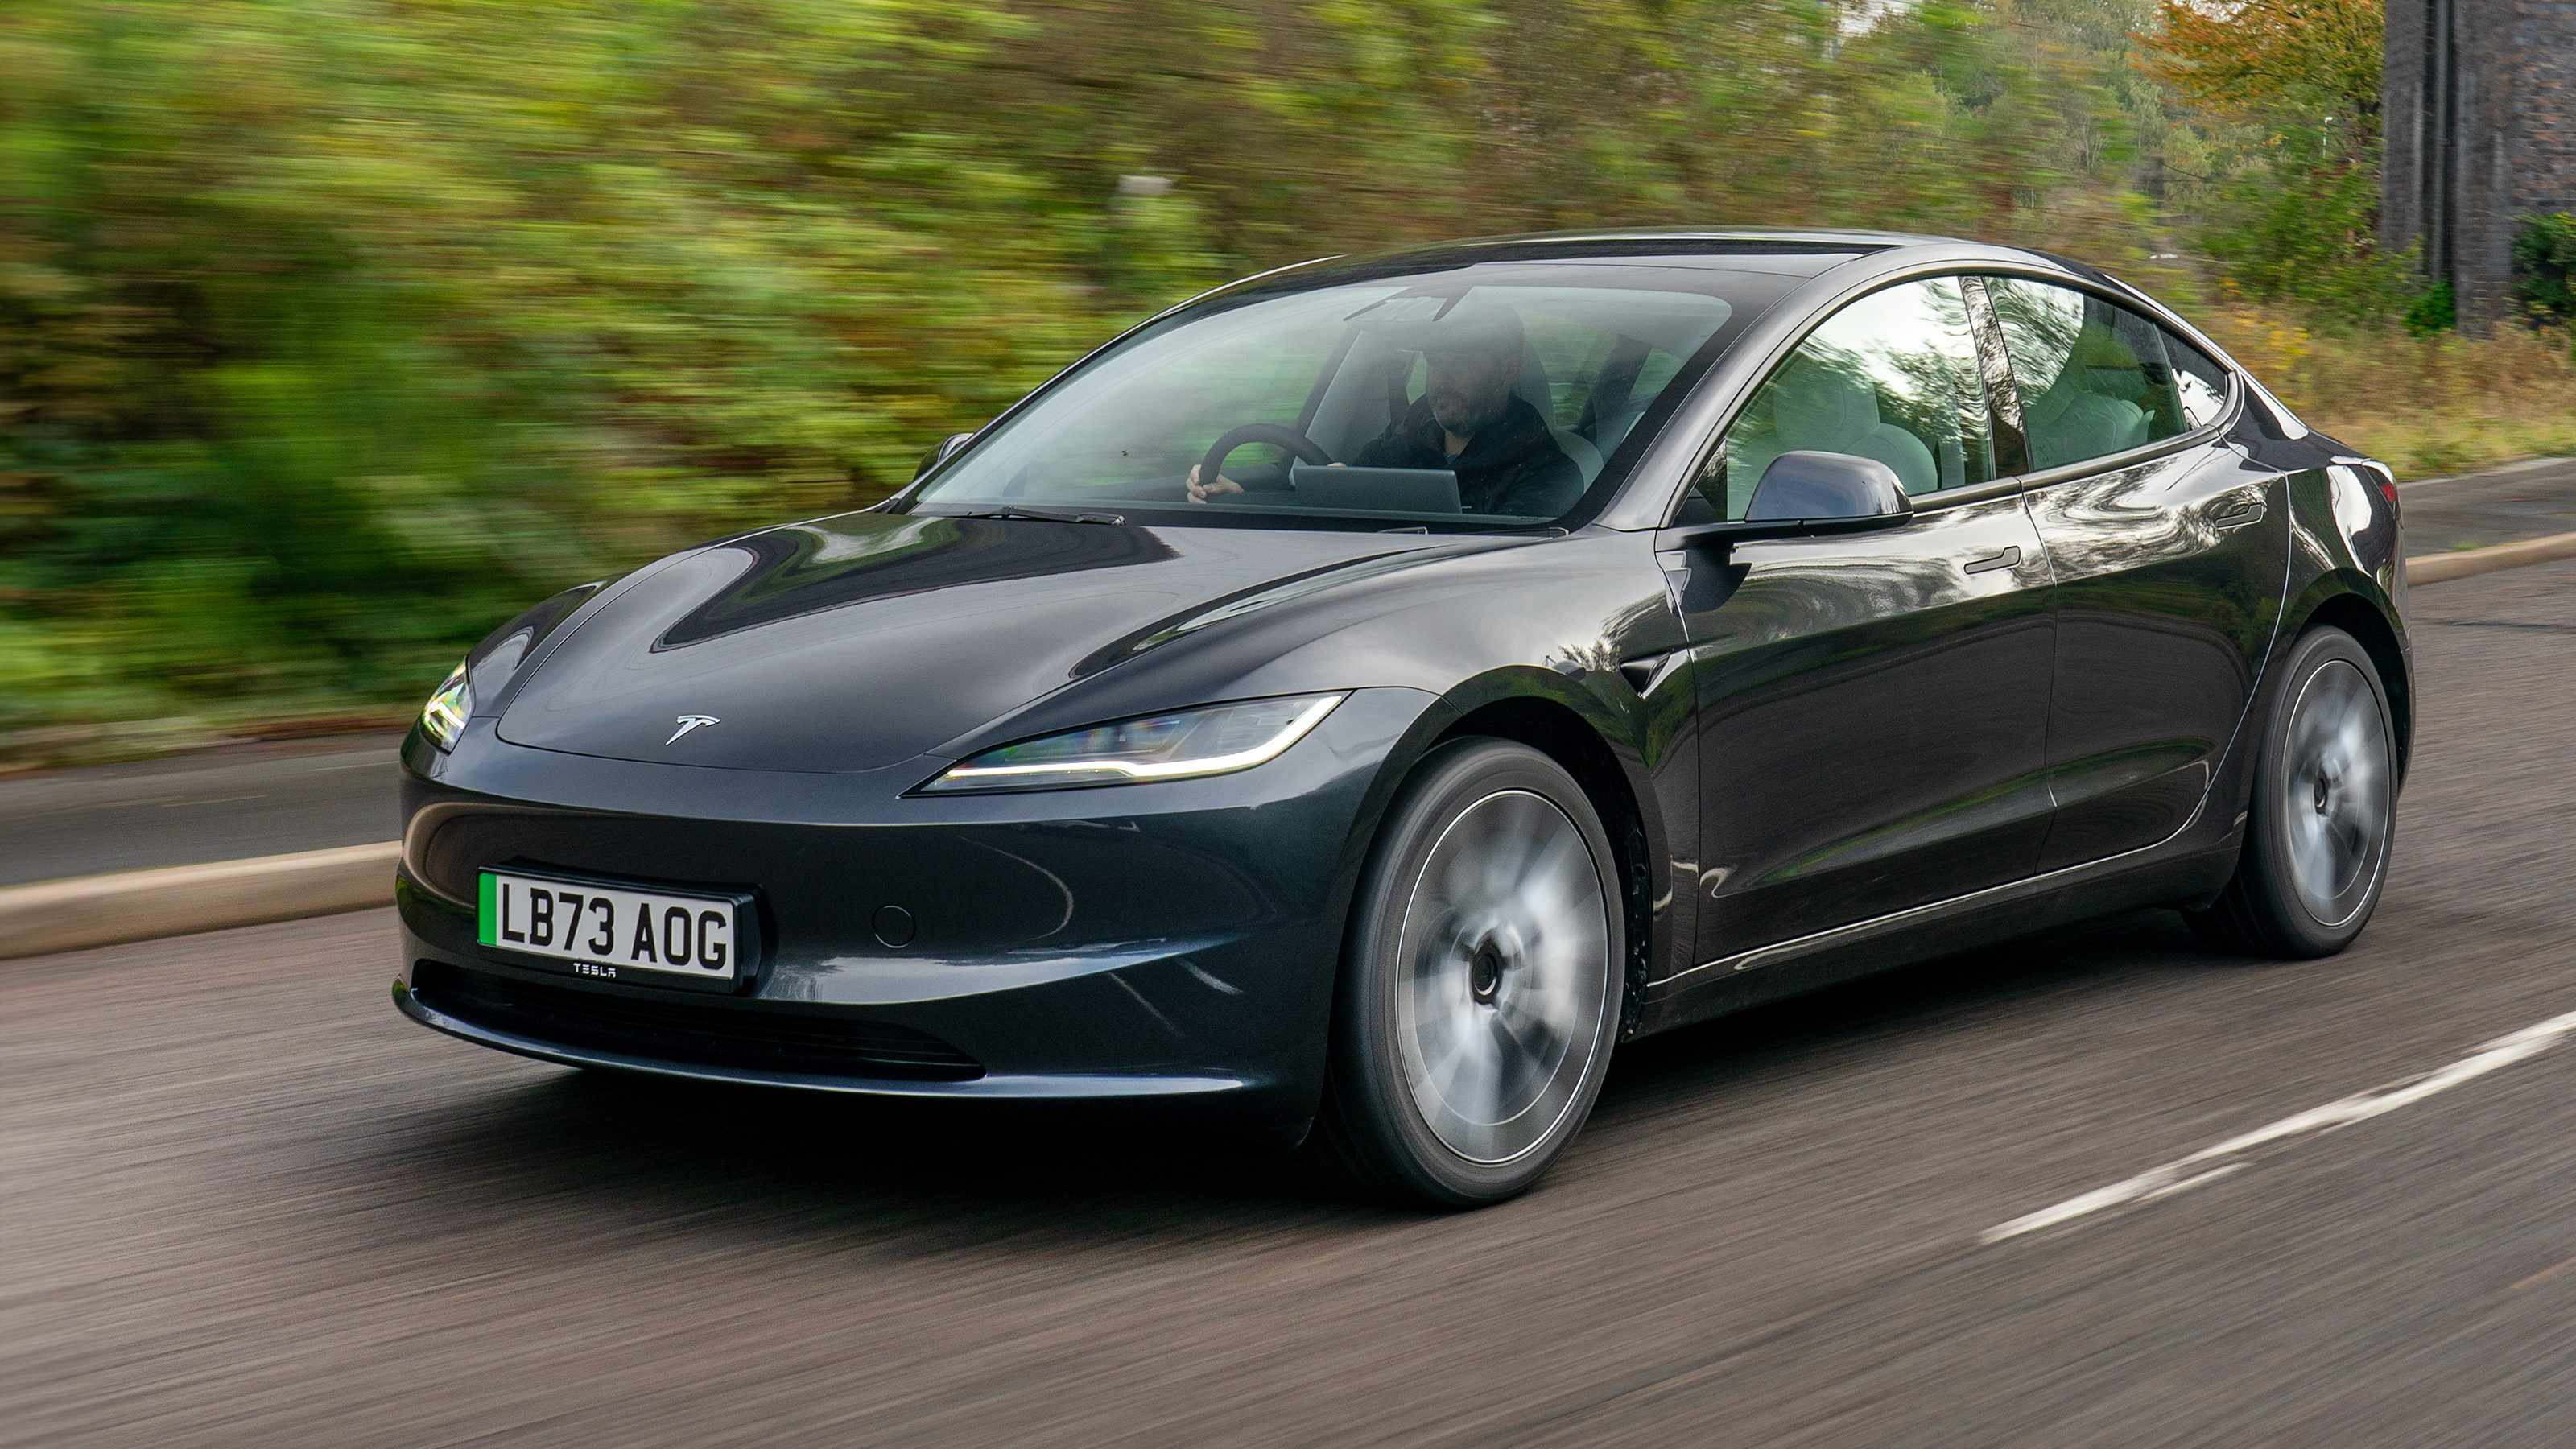 New Tesla Model 3 goes further on a charge, gets higher-quality